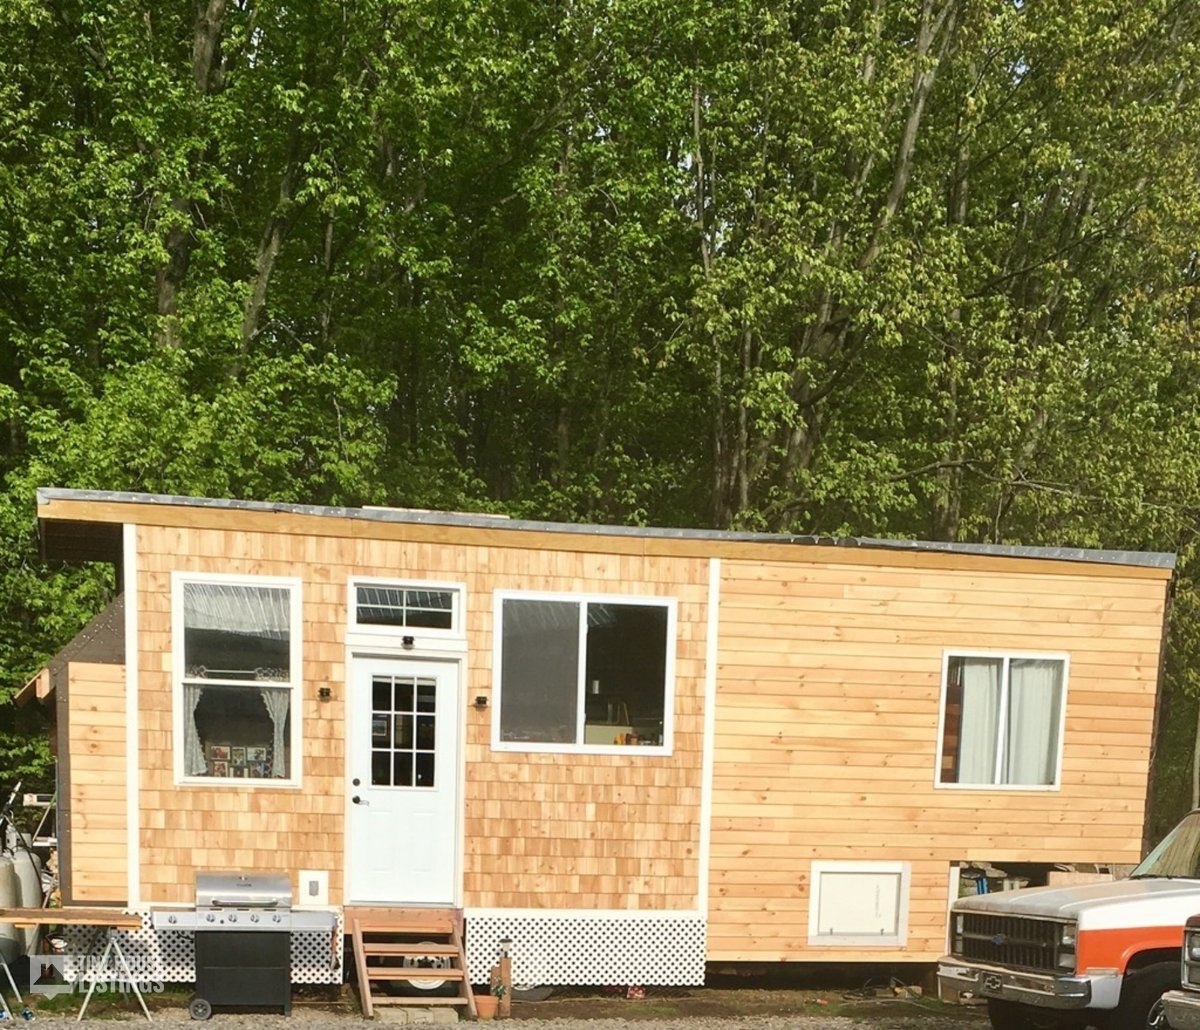 Fifth Wheel Tiny House With Wood Finish Exterior